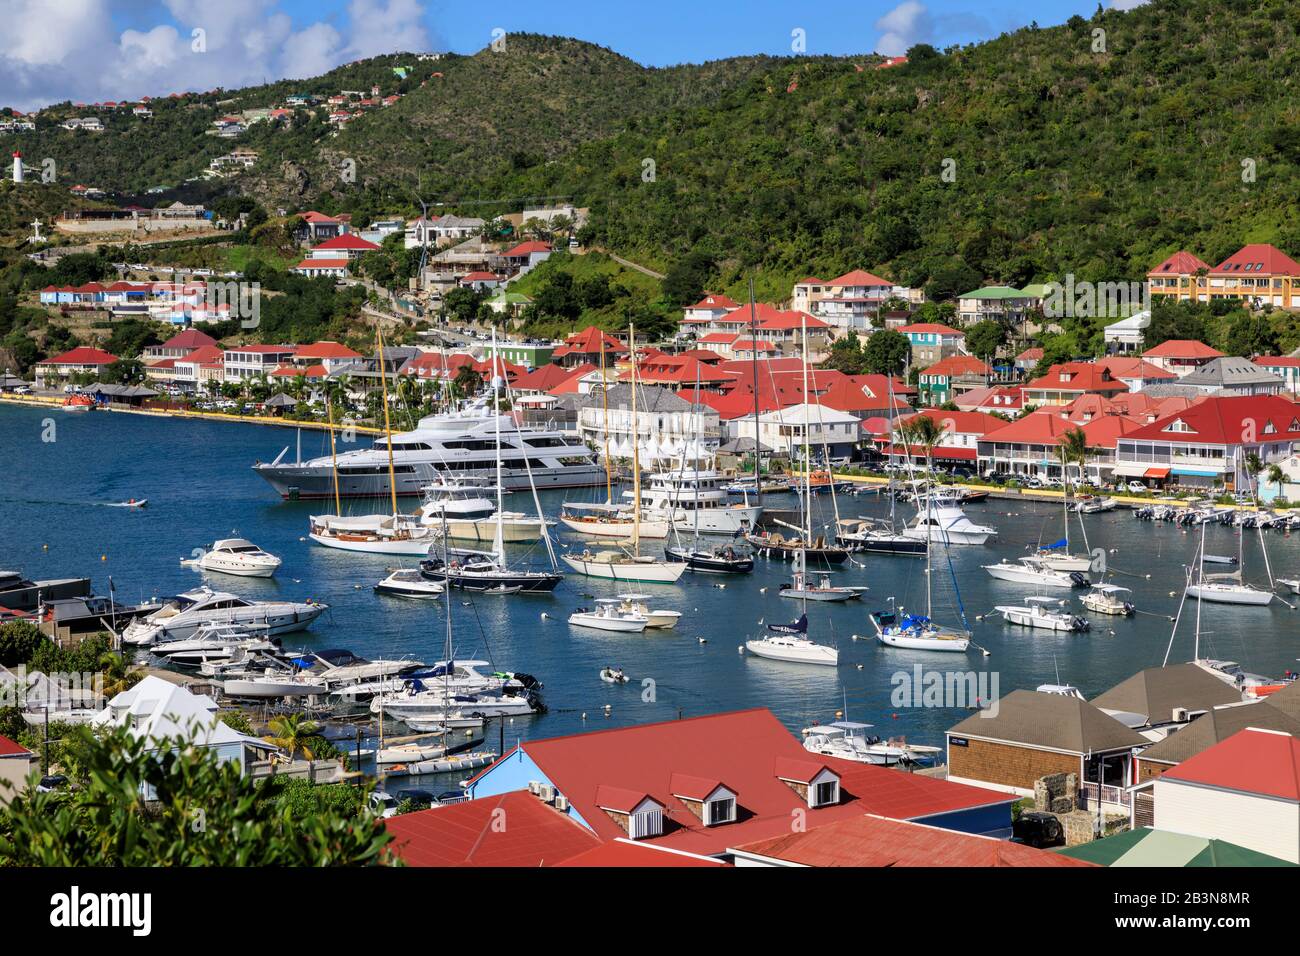 Elevated view of harbour, Gustavia, St. Barthelemy (St. Barts) (St. Barth),  West Indies, Caribbean, Central America